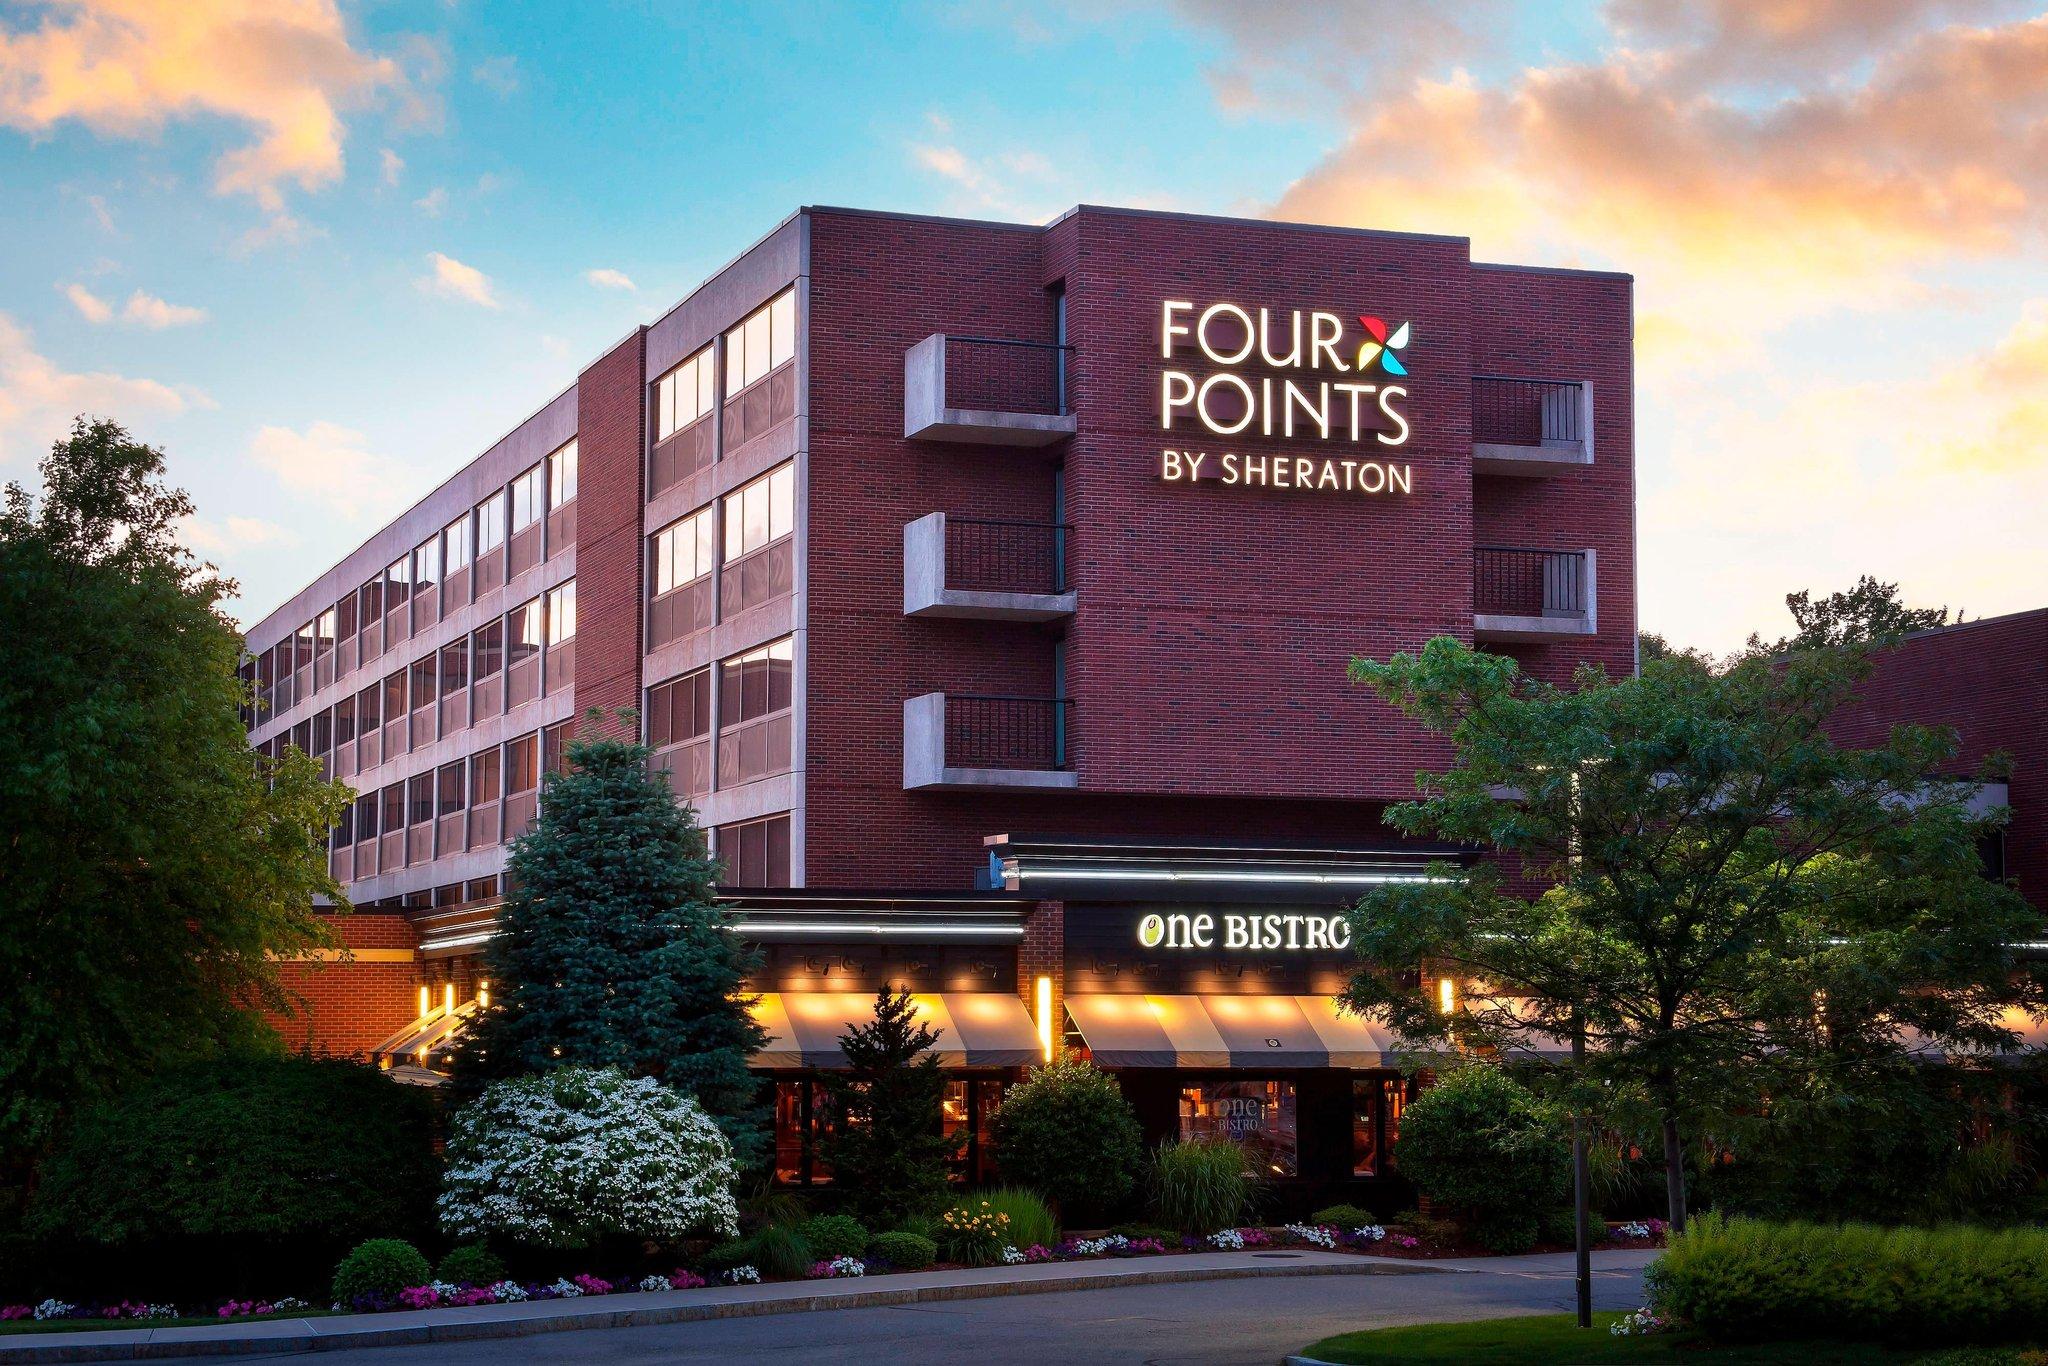 Four Points by Sheraton Norwood in Norwood, MA